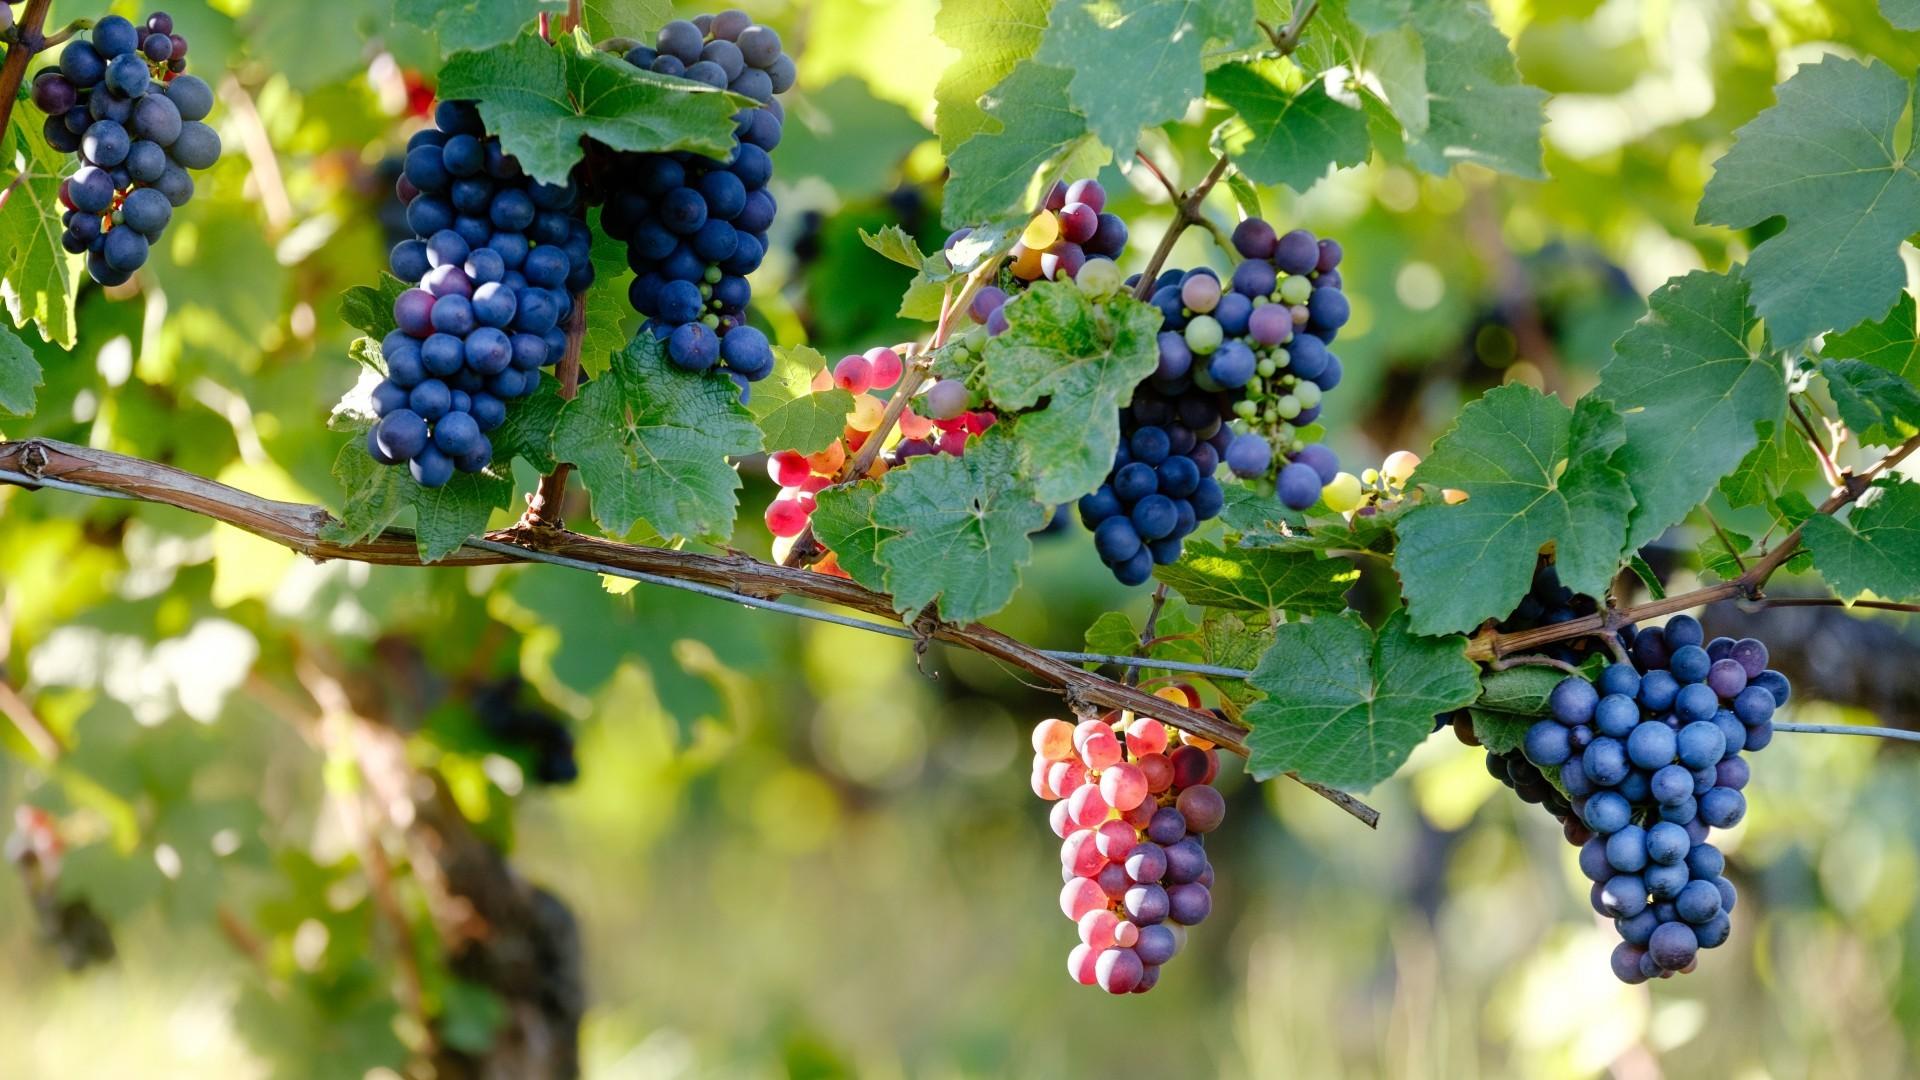 Download 1920x1080 Grapes, Vine, Branches, Sunlight, Fruits